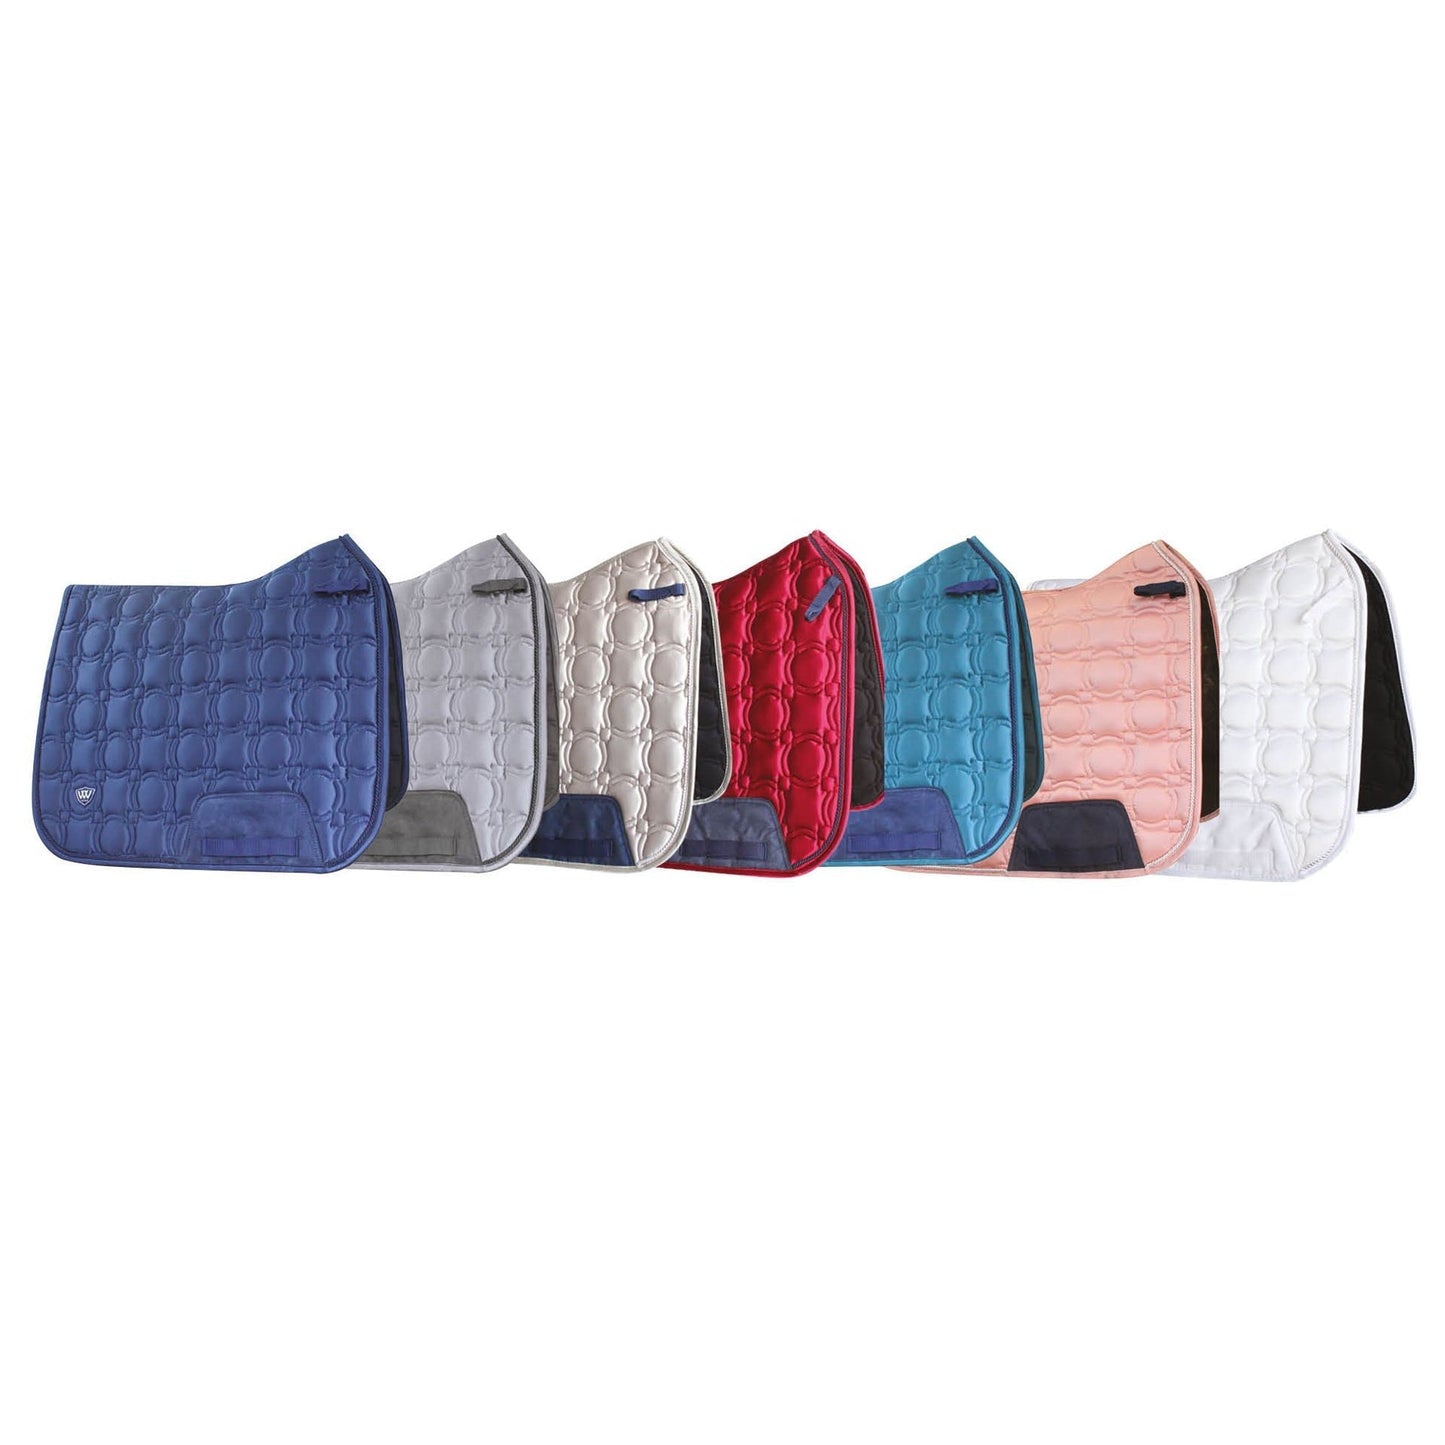 Alt text: Assorted Woof Wear horse saddle pads in various colors displayed.